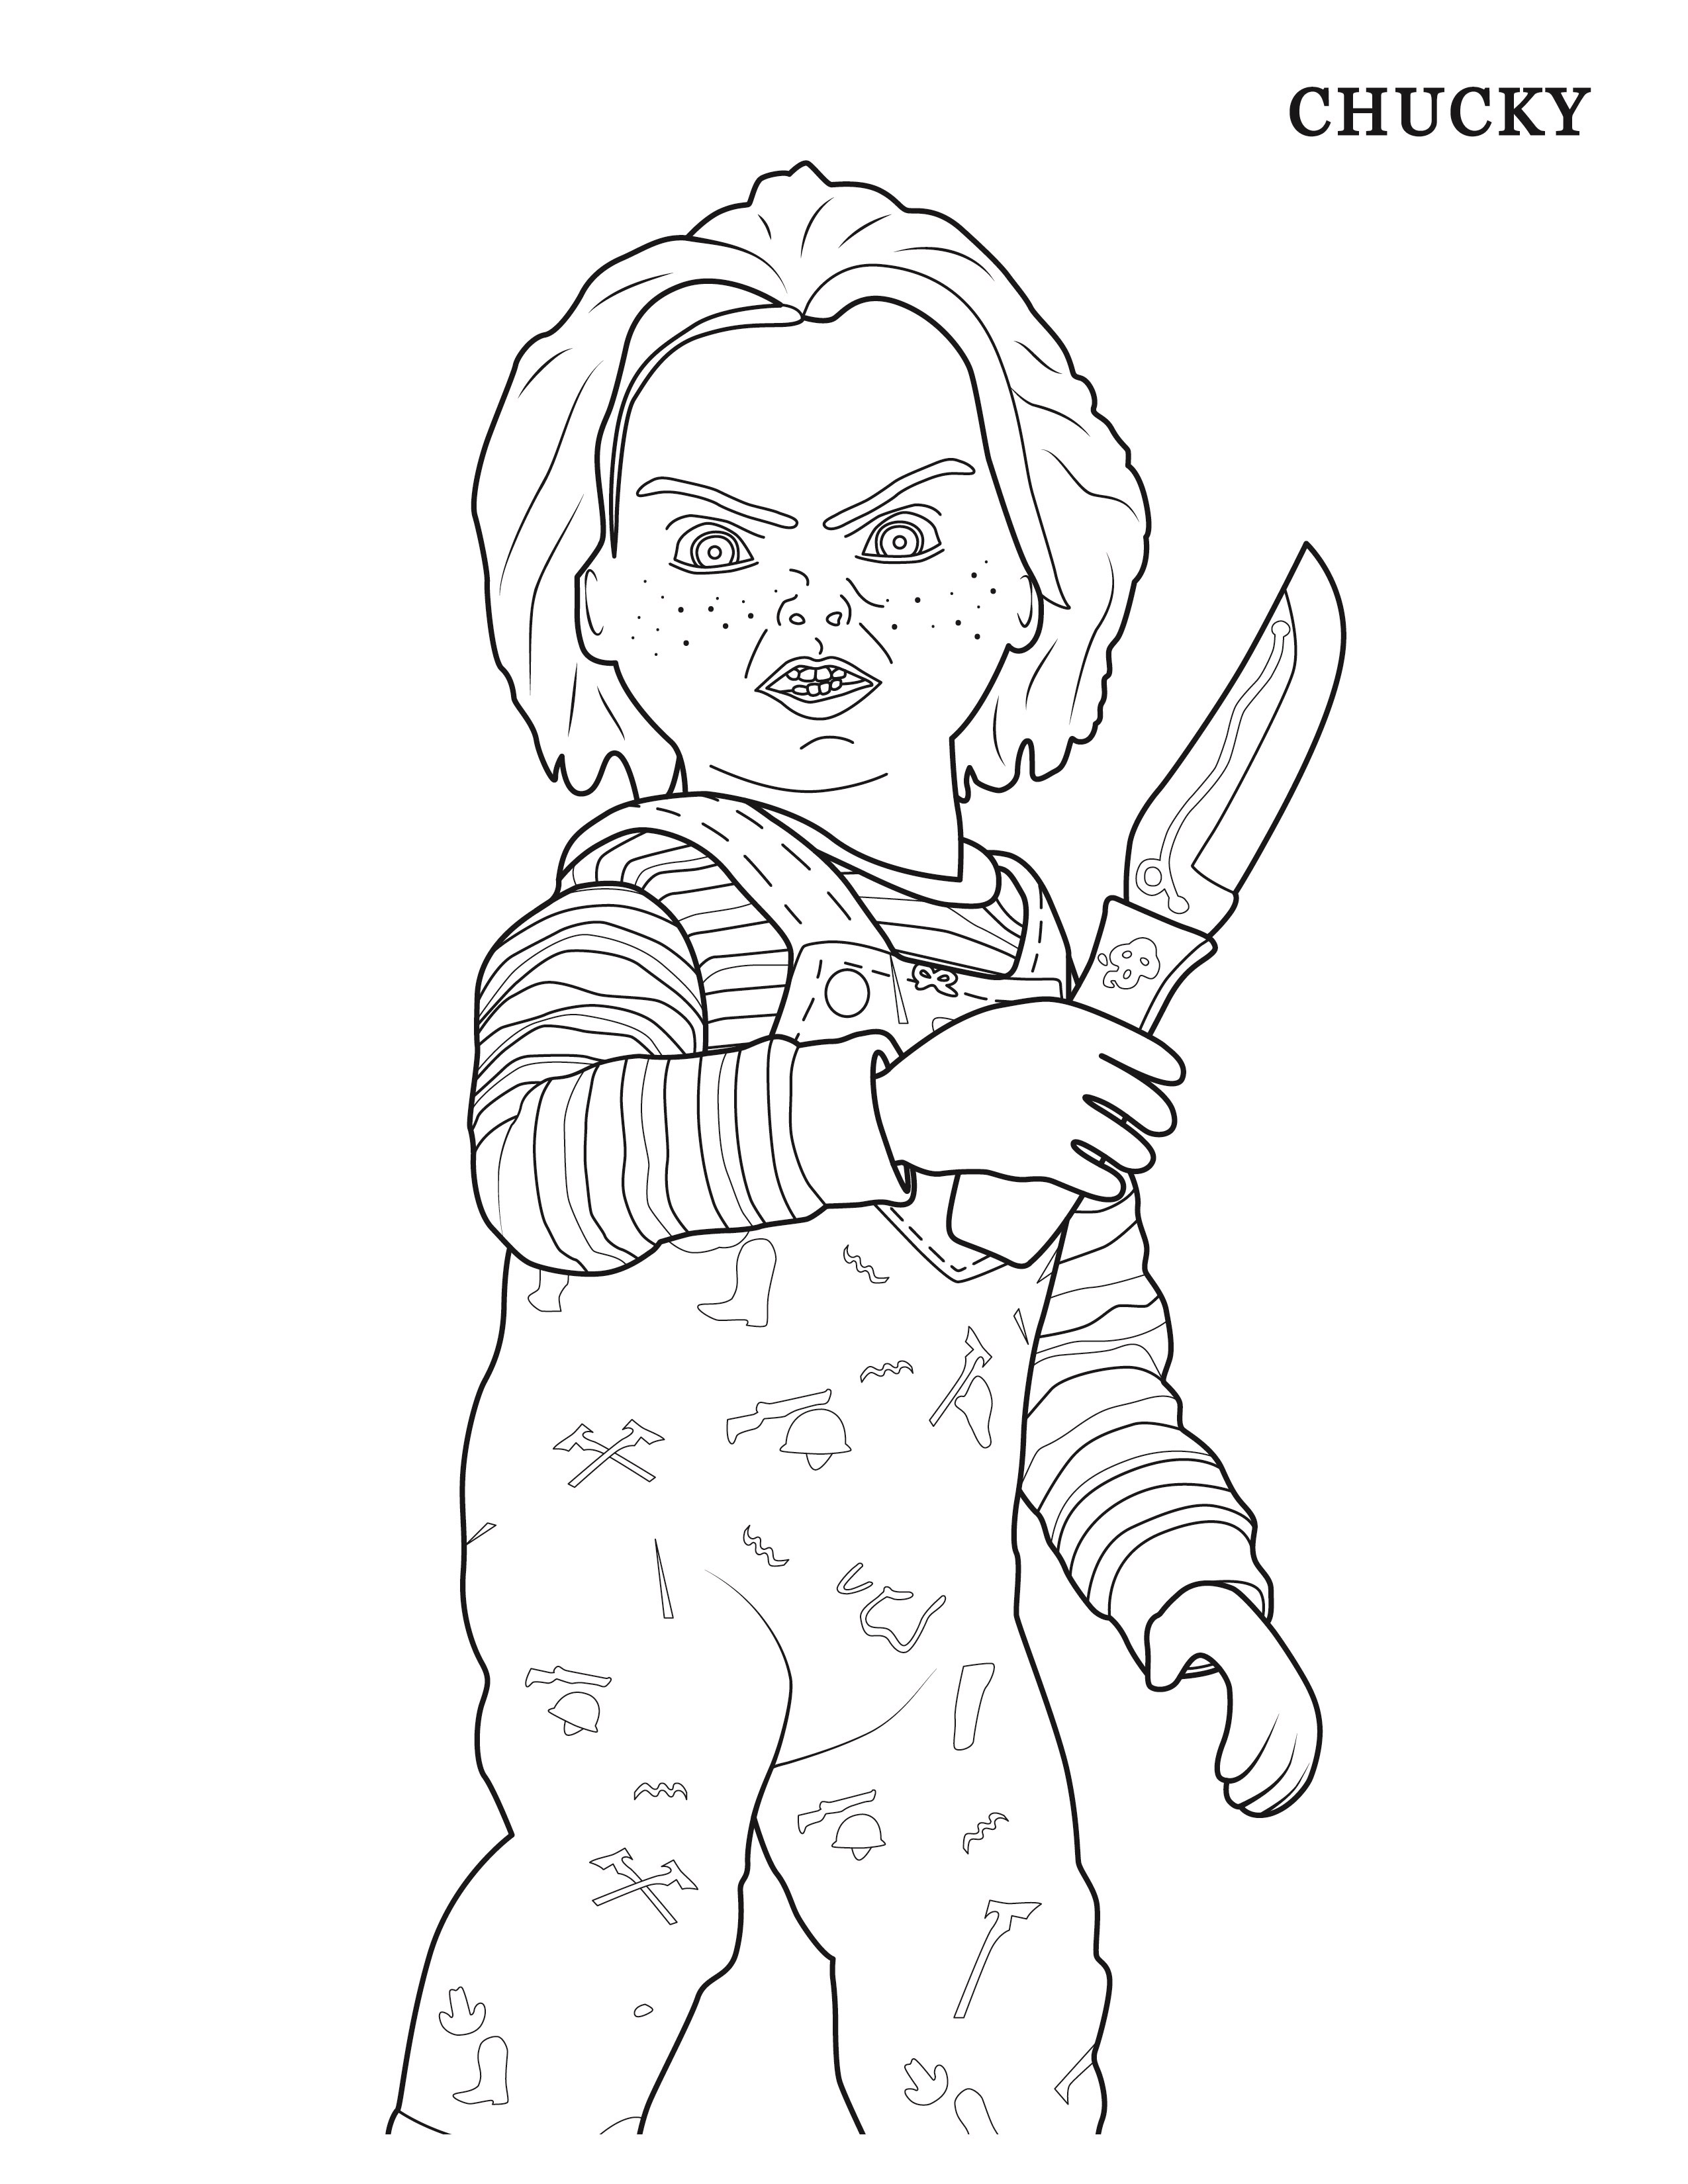 chucky coloring page